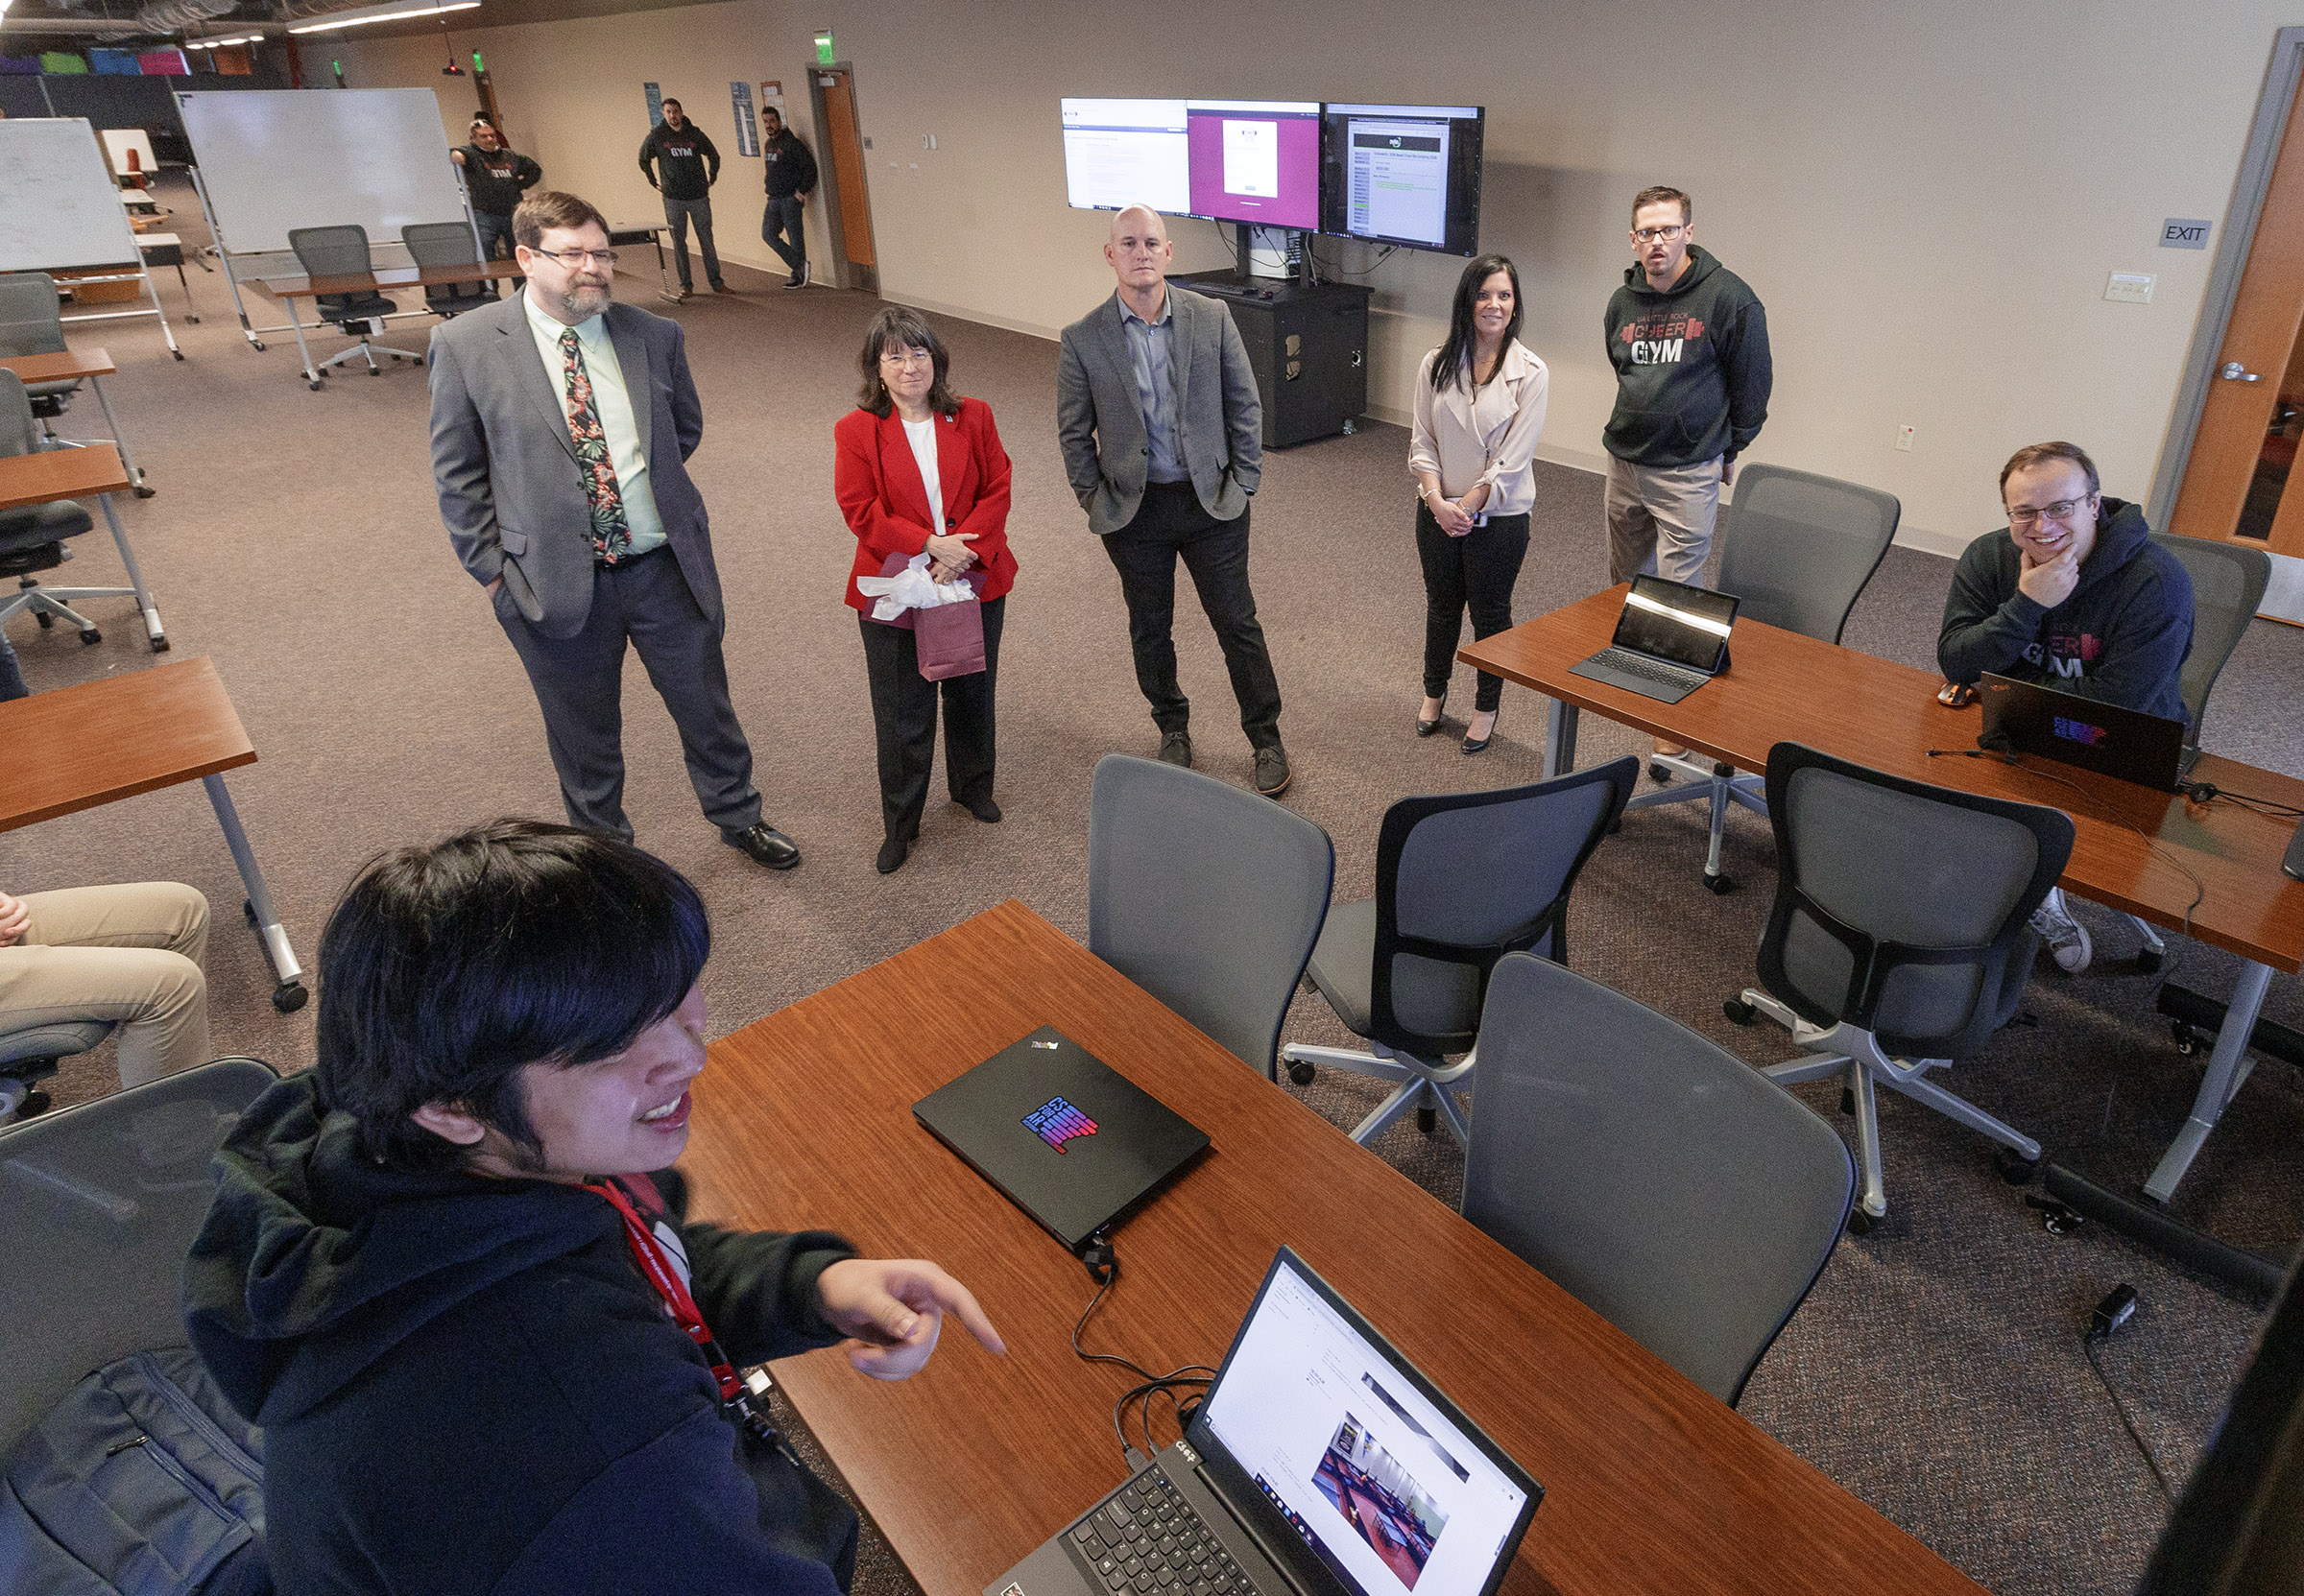 UA Little Rock visitors tour the UA Little Rock Cyber Gym, which opened in December 2019. Photo by Ben Krain.